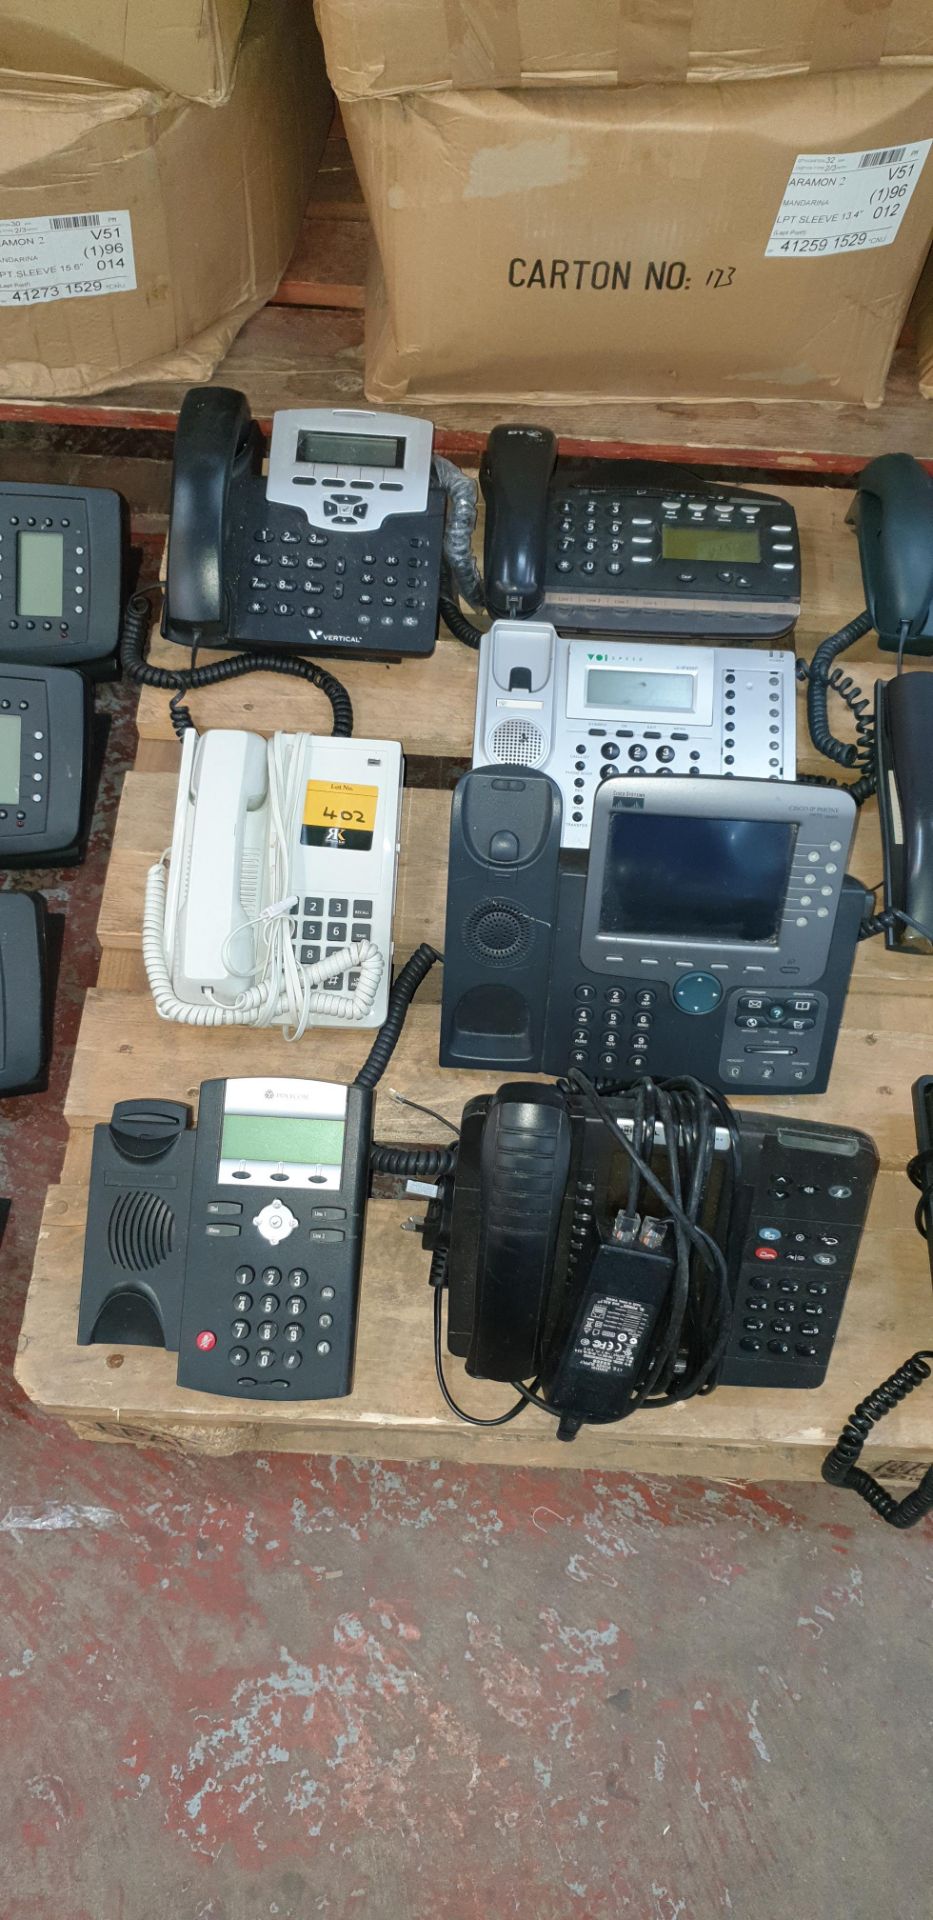 16 off assorted telephone handsets by Polycom, Cisco, Splicecom, Nortel & others - Image 2 of 8